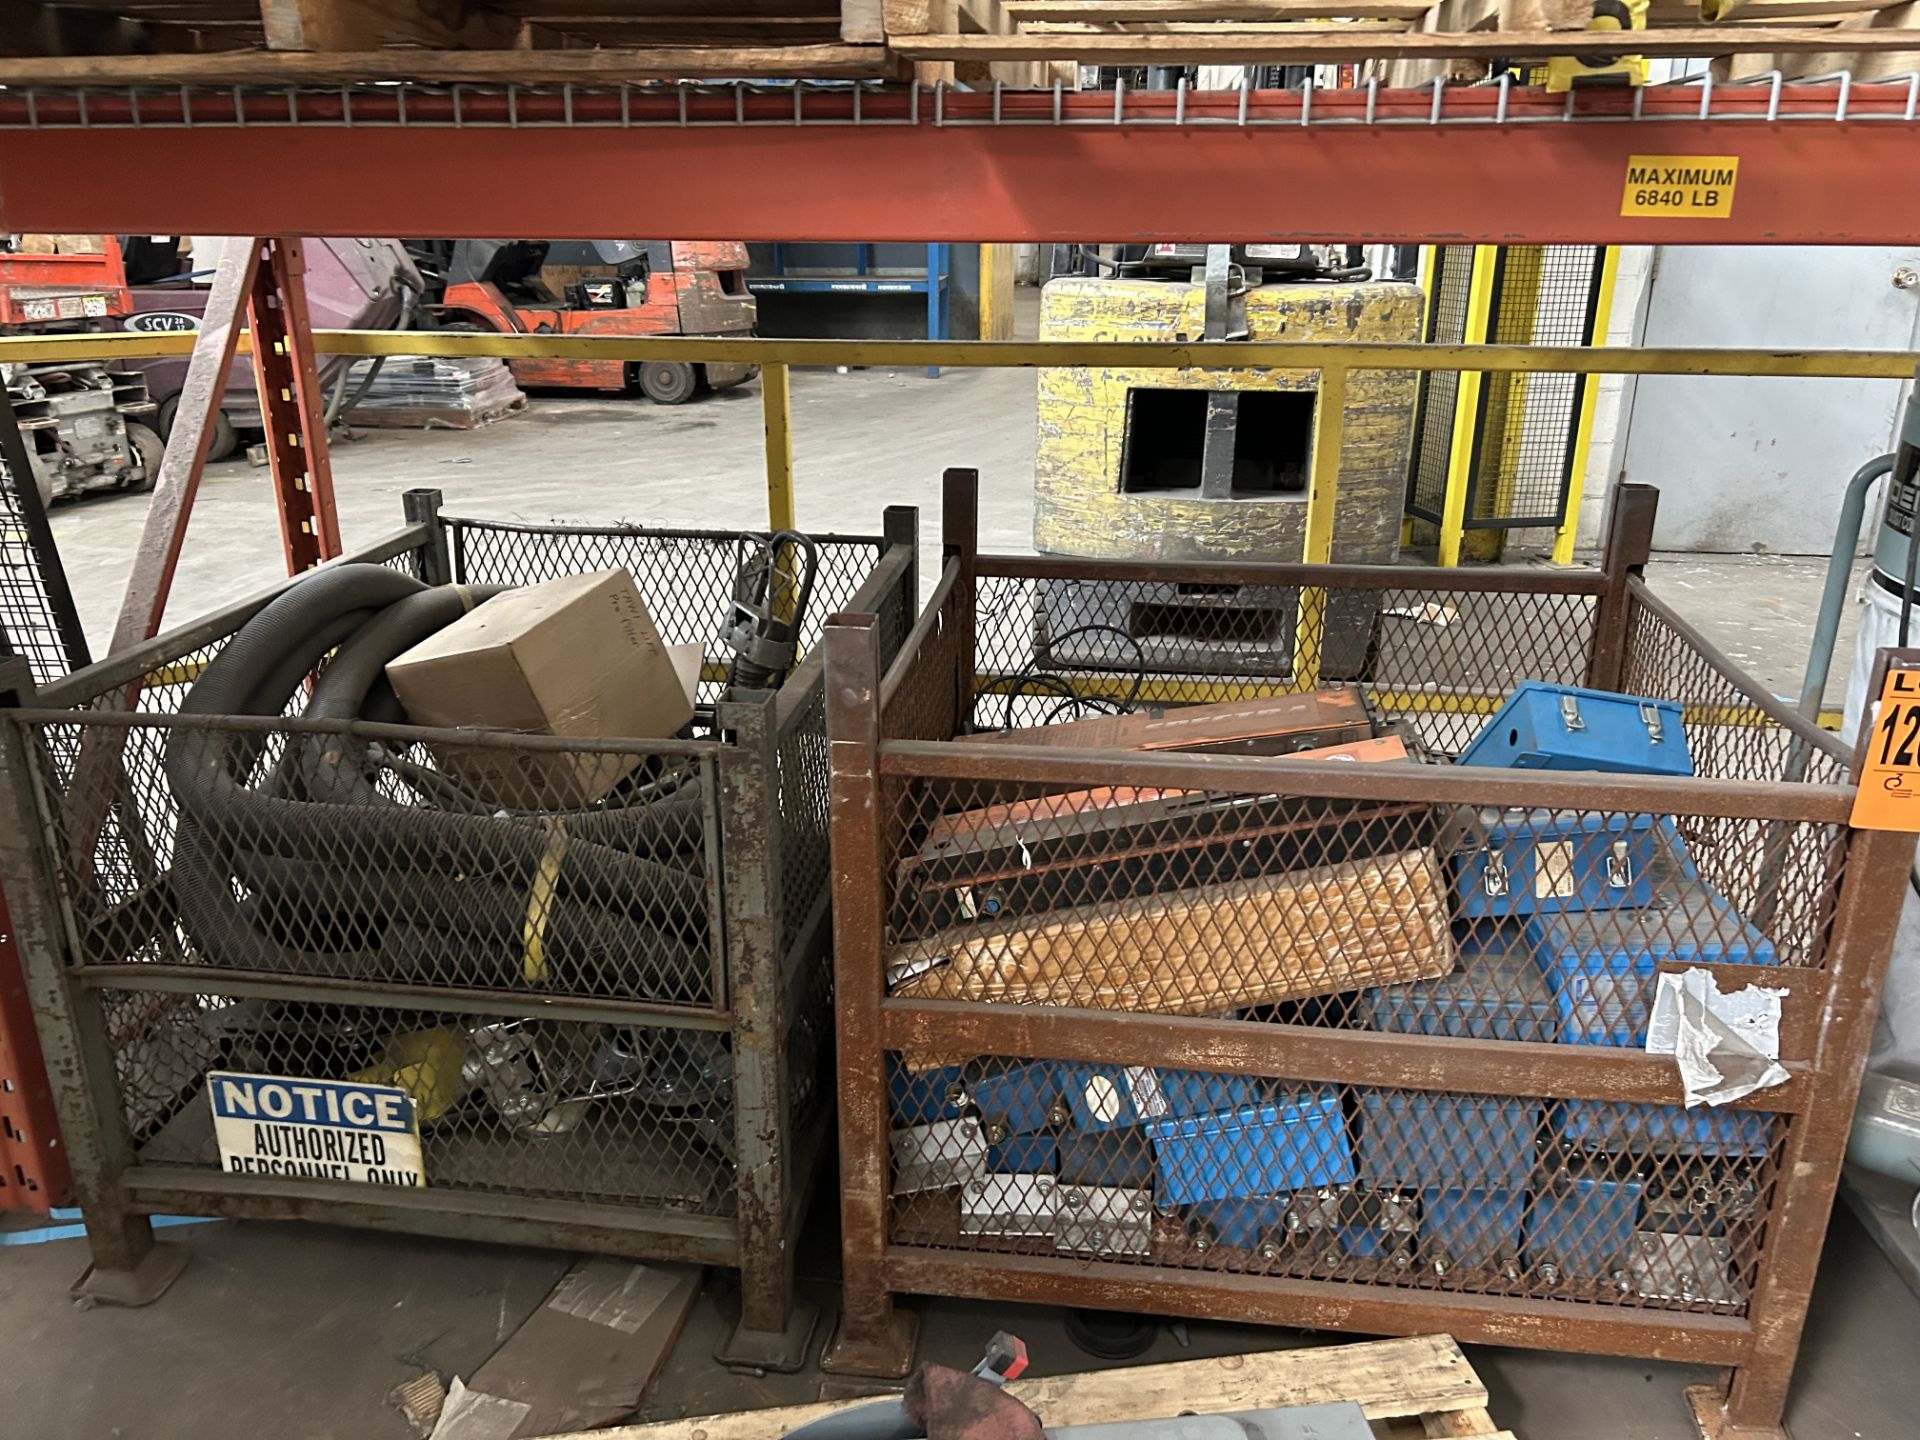 (2) Totes and contents of SPECTRA and METALFORM safety barriers, Microguard units, TAWI Vacuum lifte - Image 2 of 4